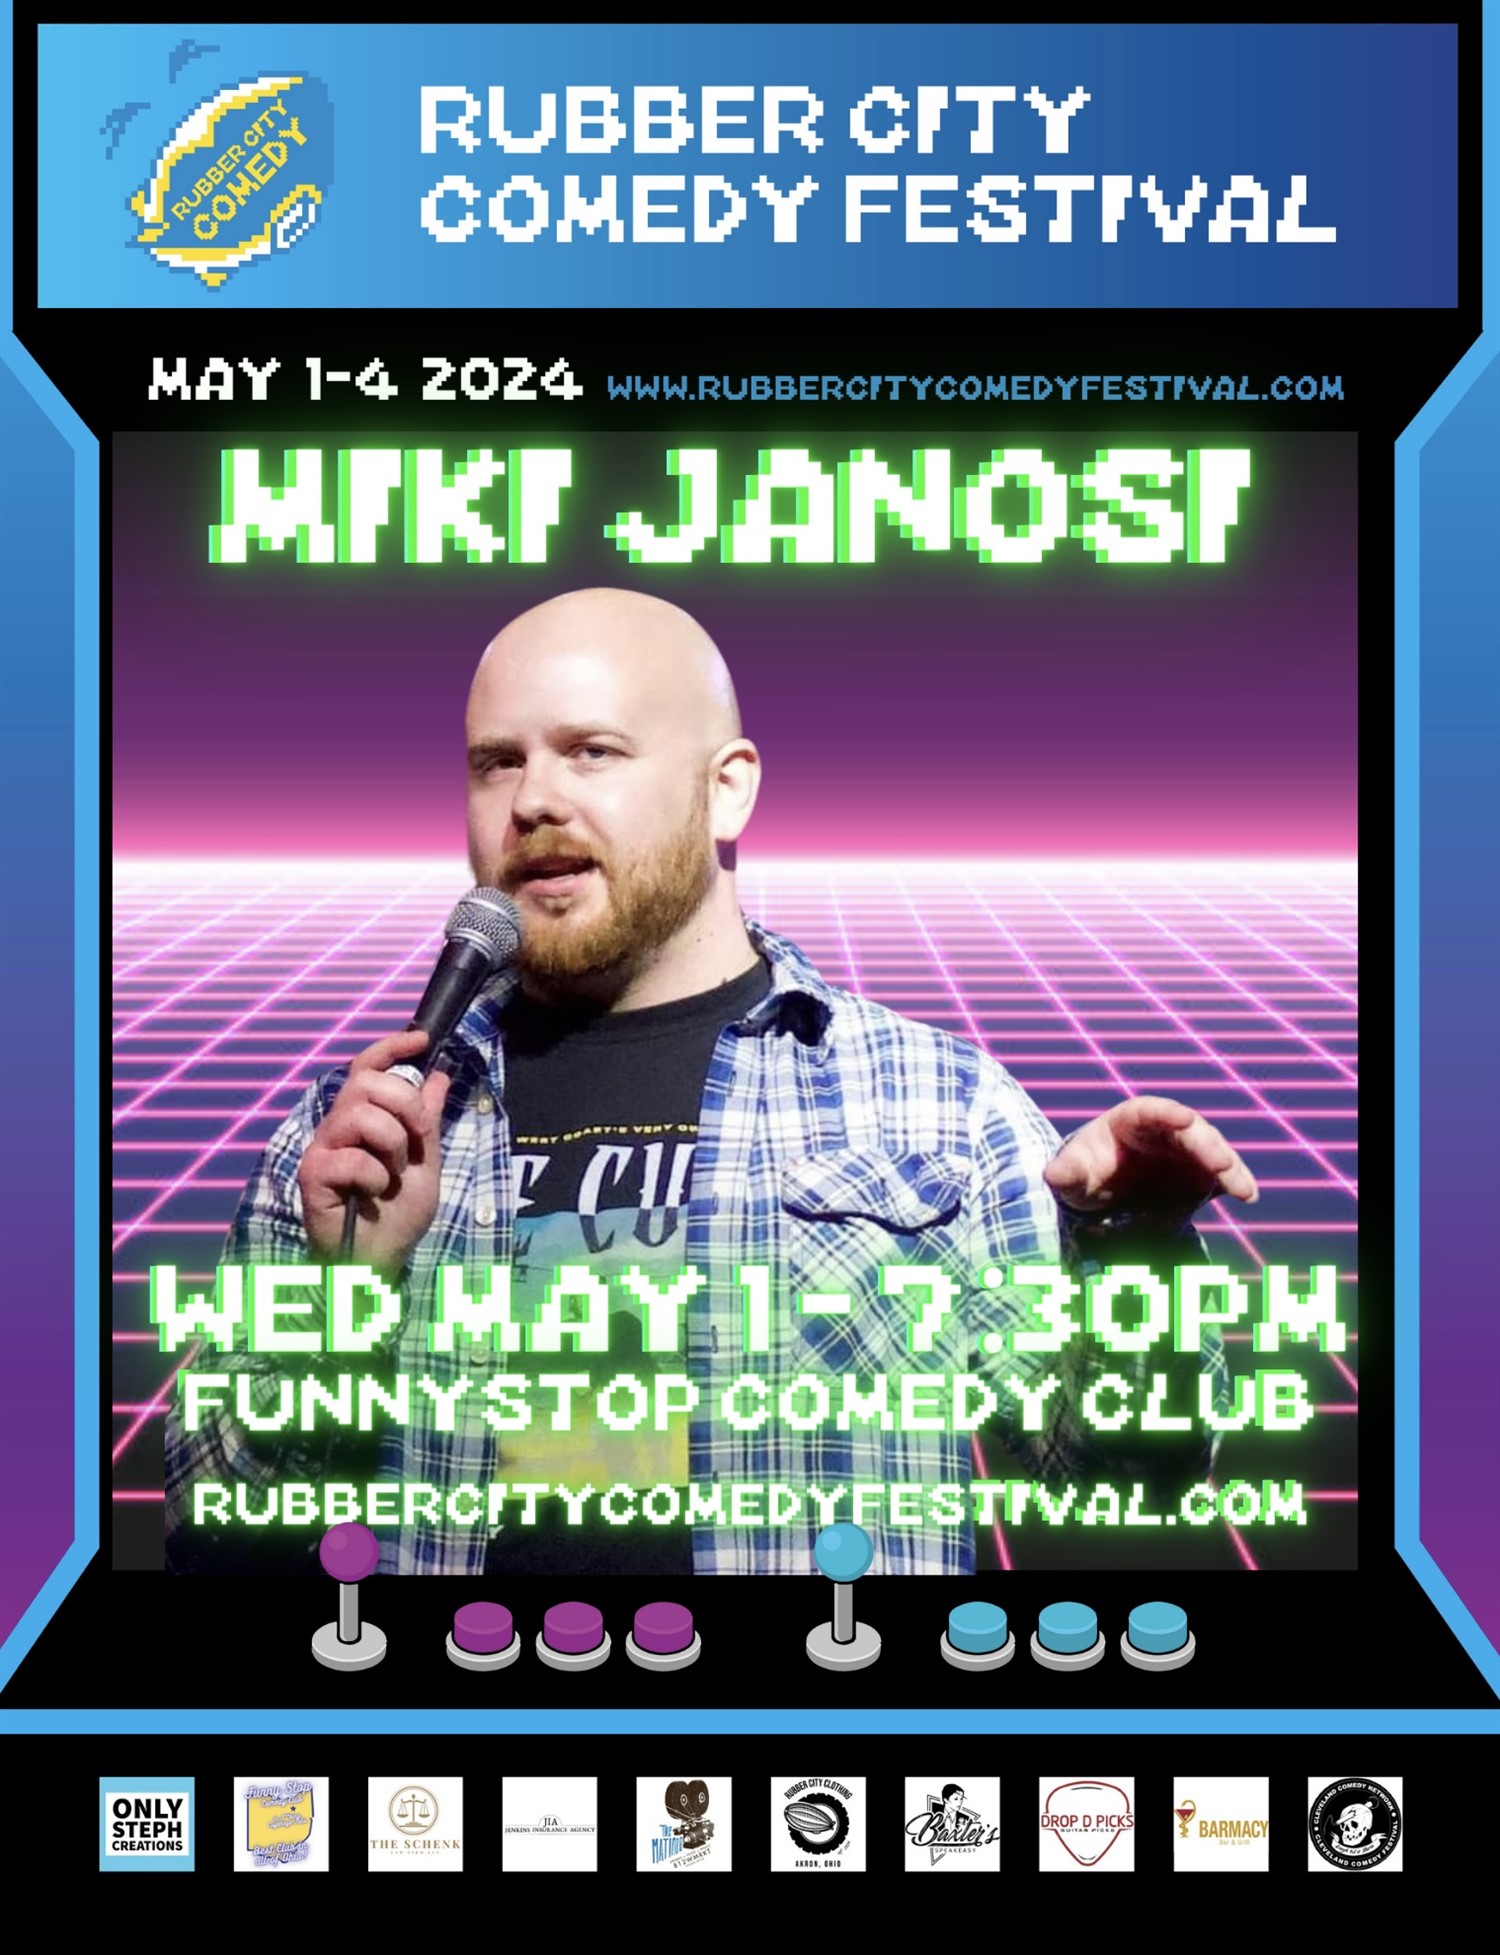 Miki Janosi Headlines for Rubber City Comedy Festival Funny Stop Comedy Club on mai 01, 19:30@Funny Stop Comedy Club - Achetez des billets et obtenez des informations surFunny Stop funnystop.online